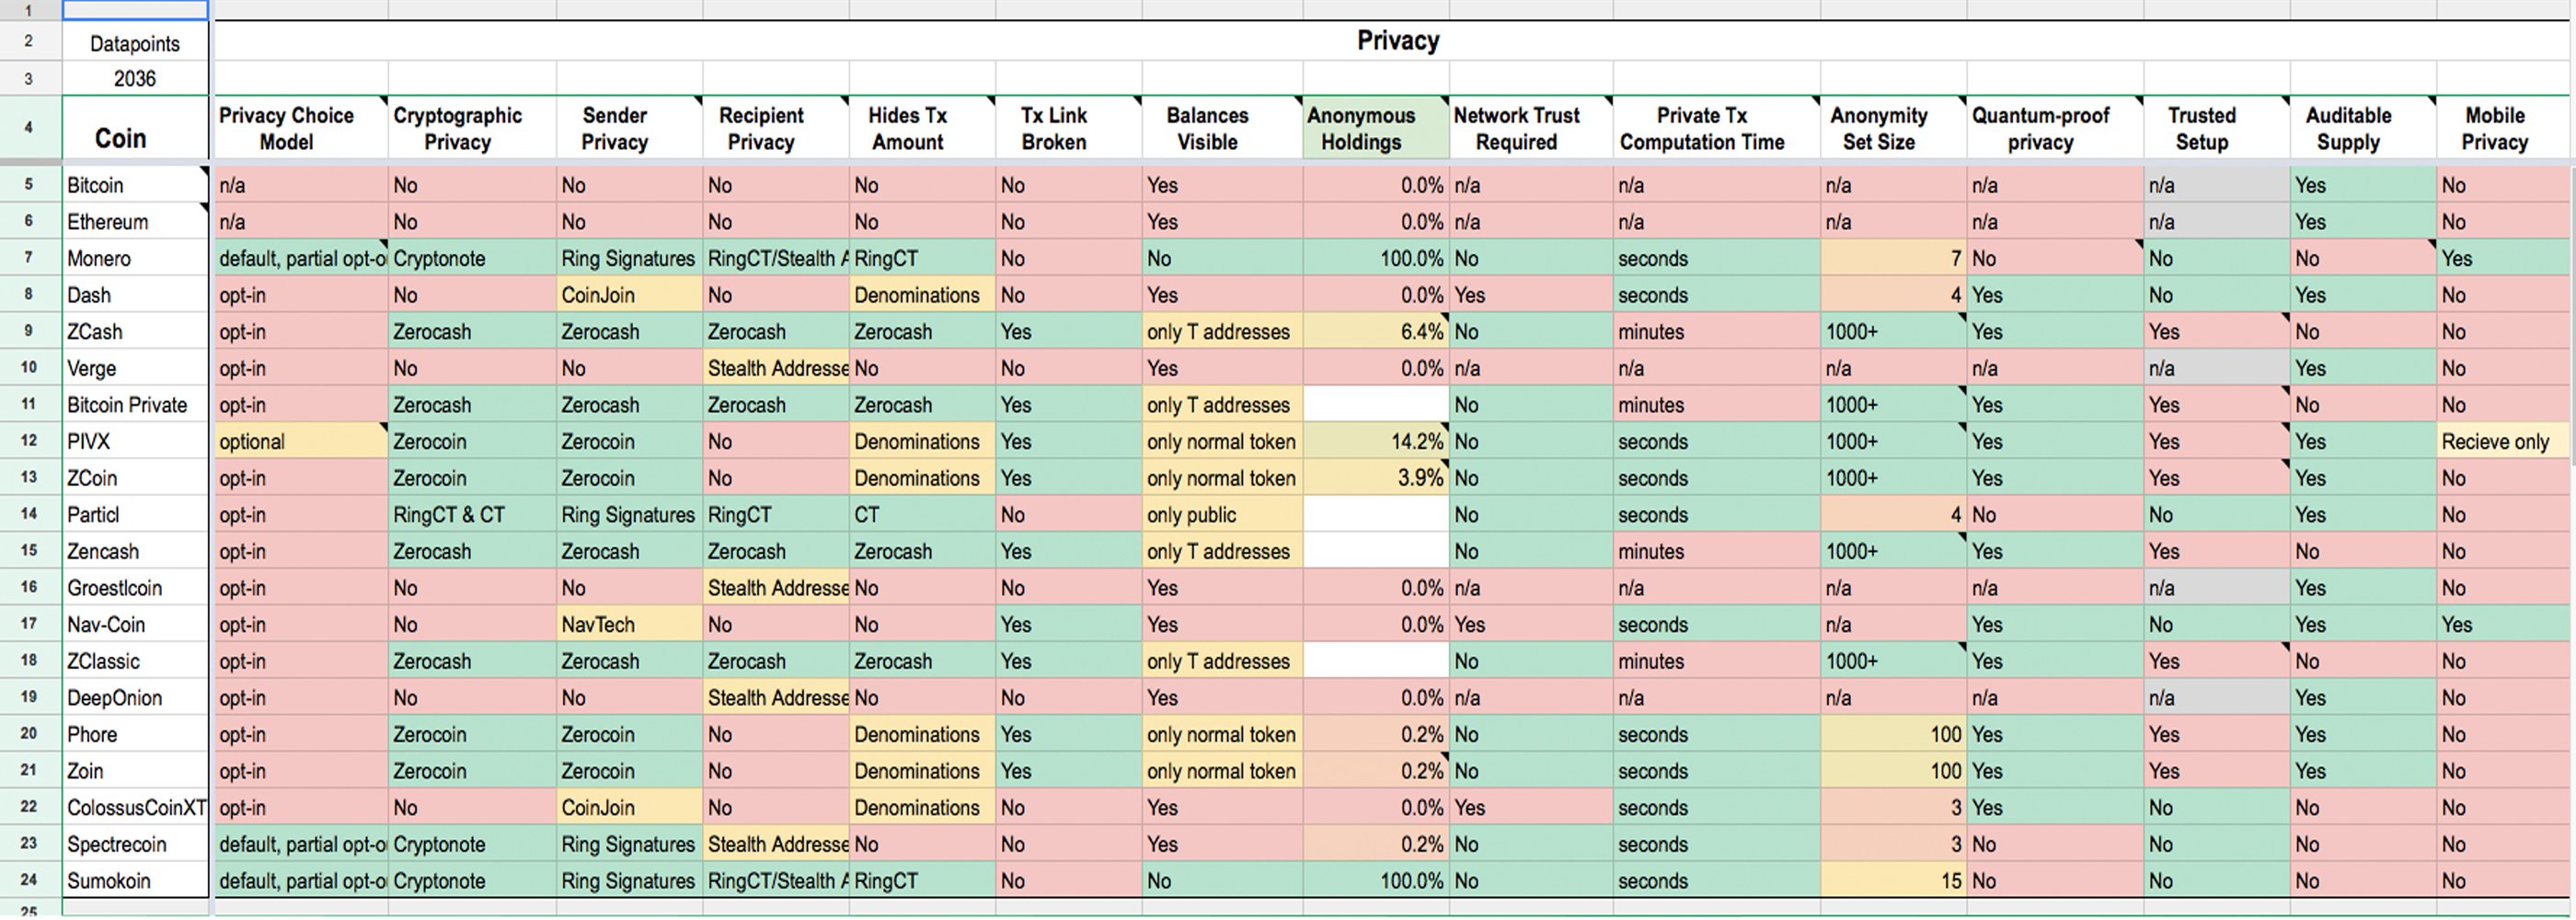 The Privacy Coin Matrix: A Comprehensive Spreadsheet of Anonymous Digital Assets